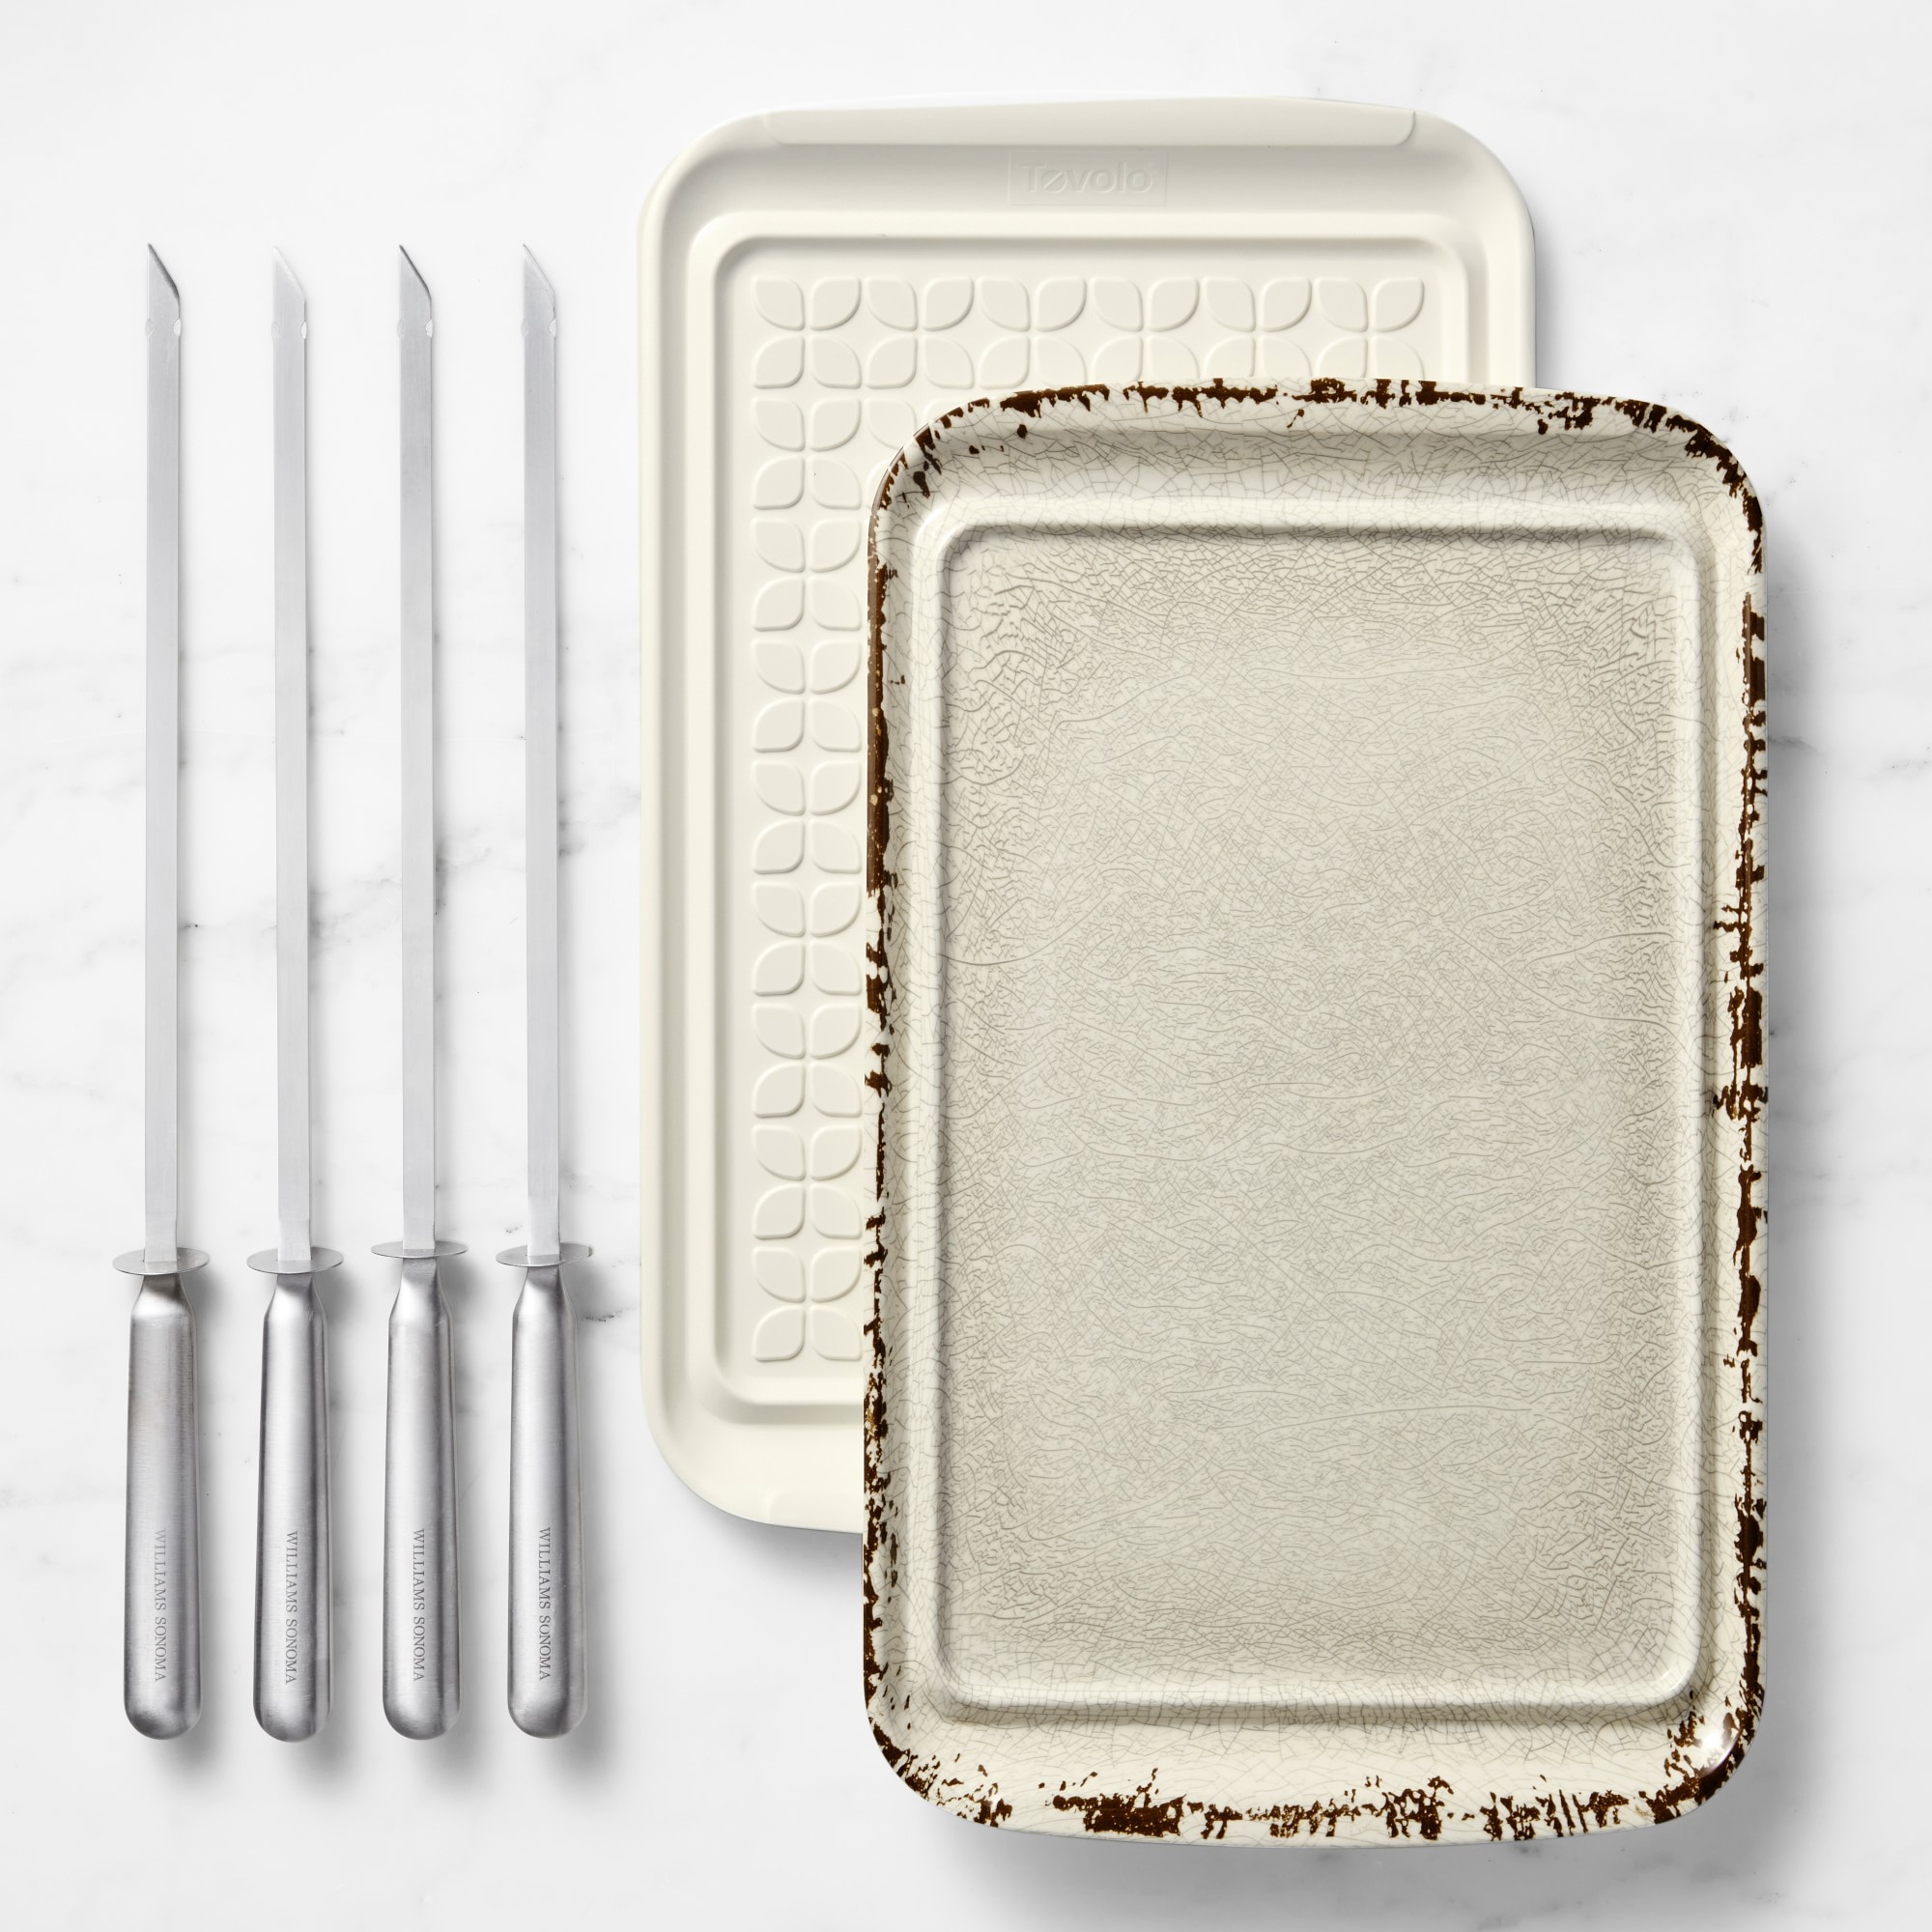 Williams Sonoma Rustic Grill Prep Trays with Stainless-Steel Skewers